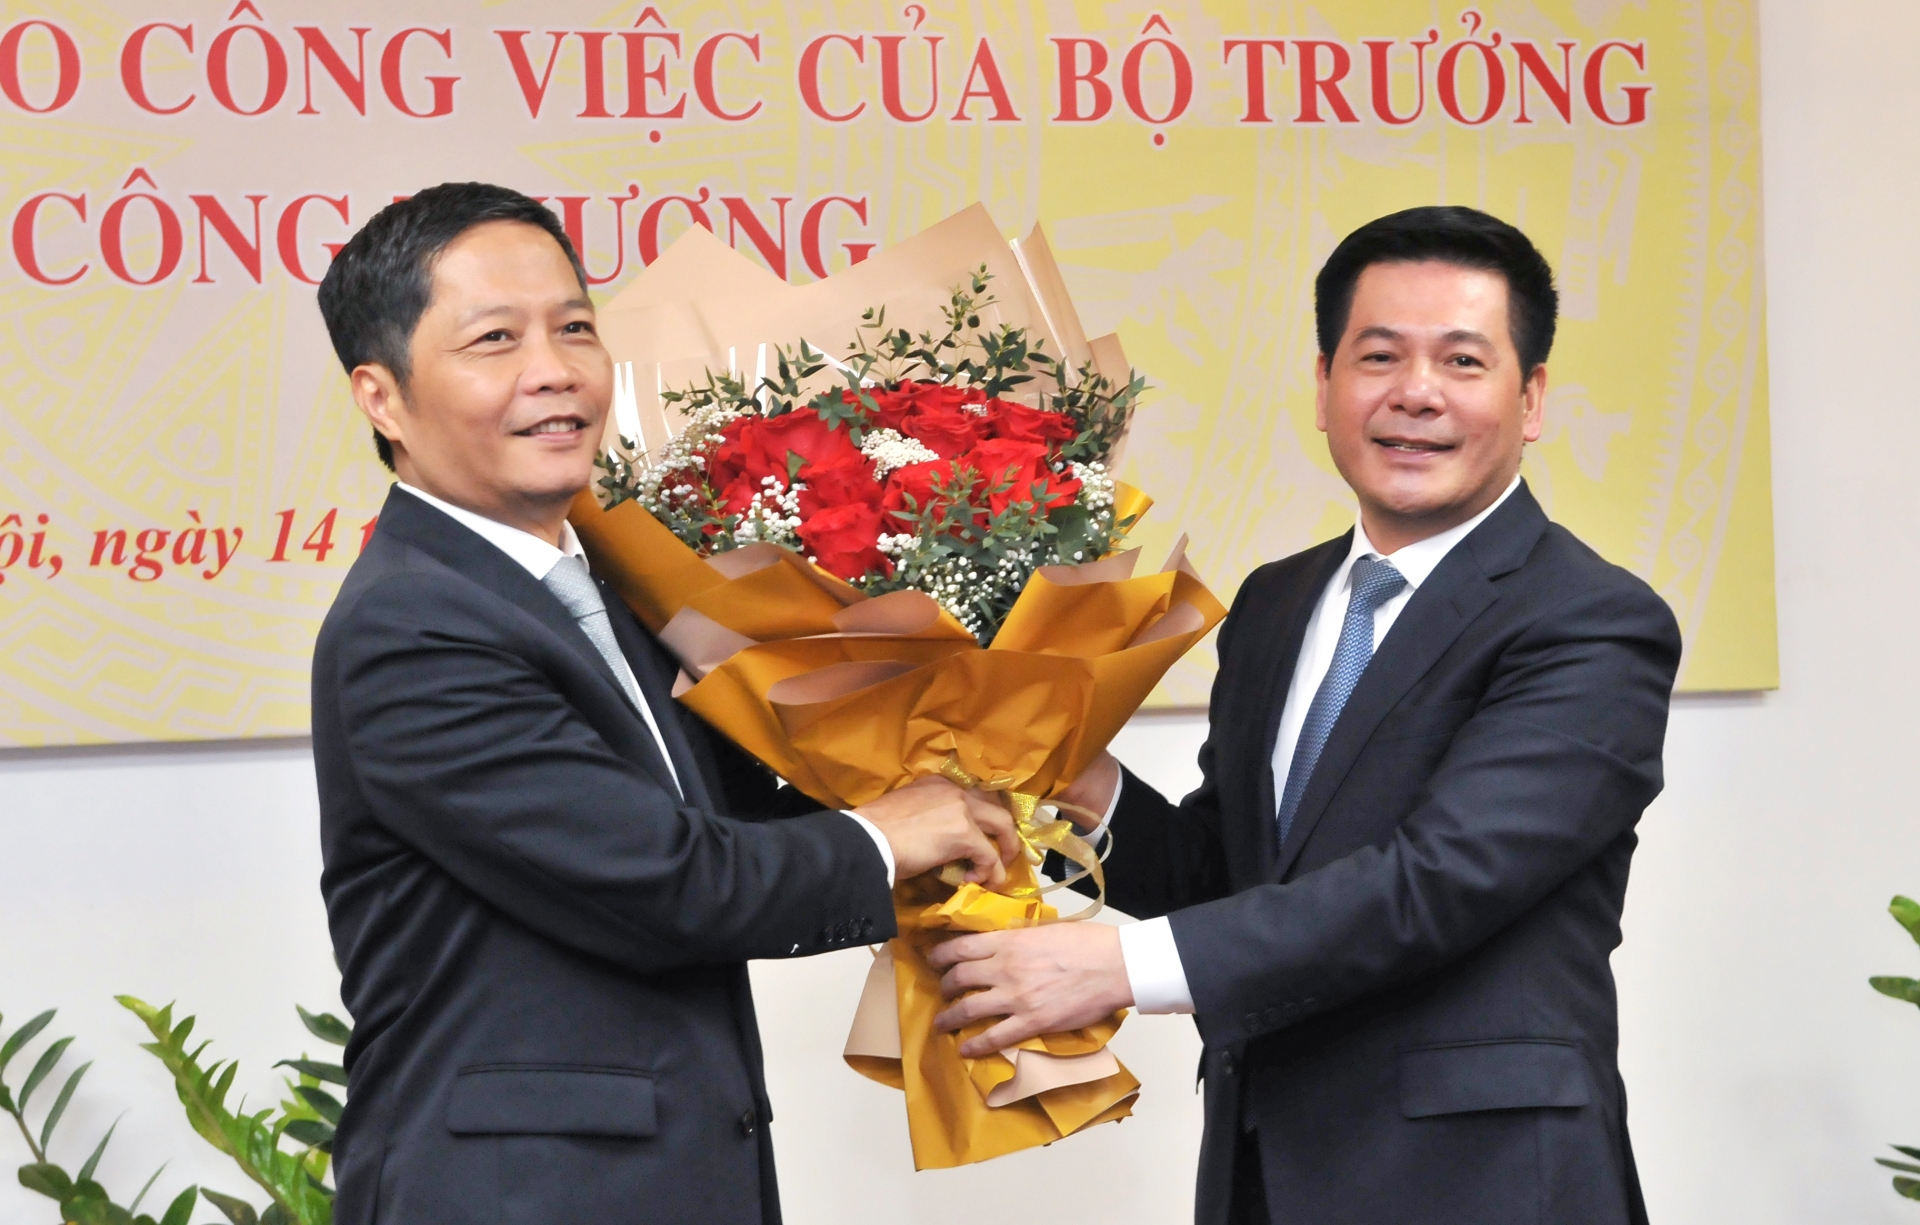 New Vietnamese Minister of Industry and Trade takes office